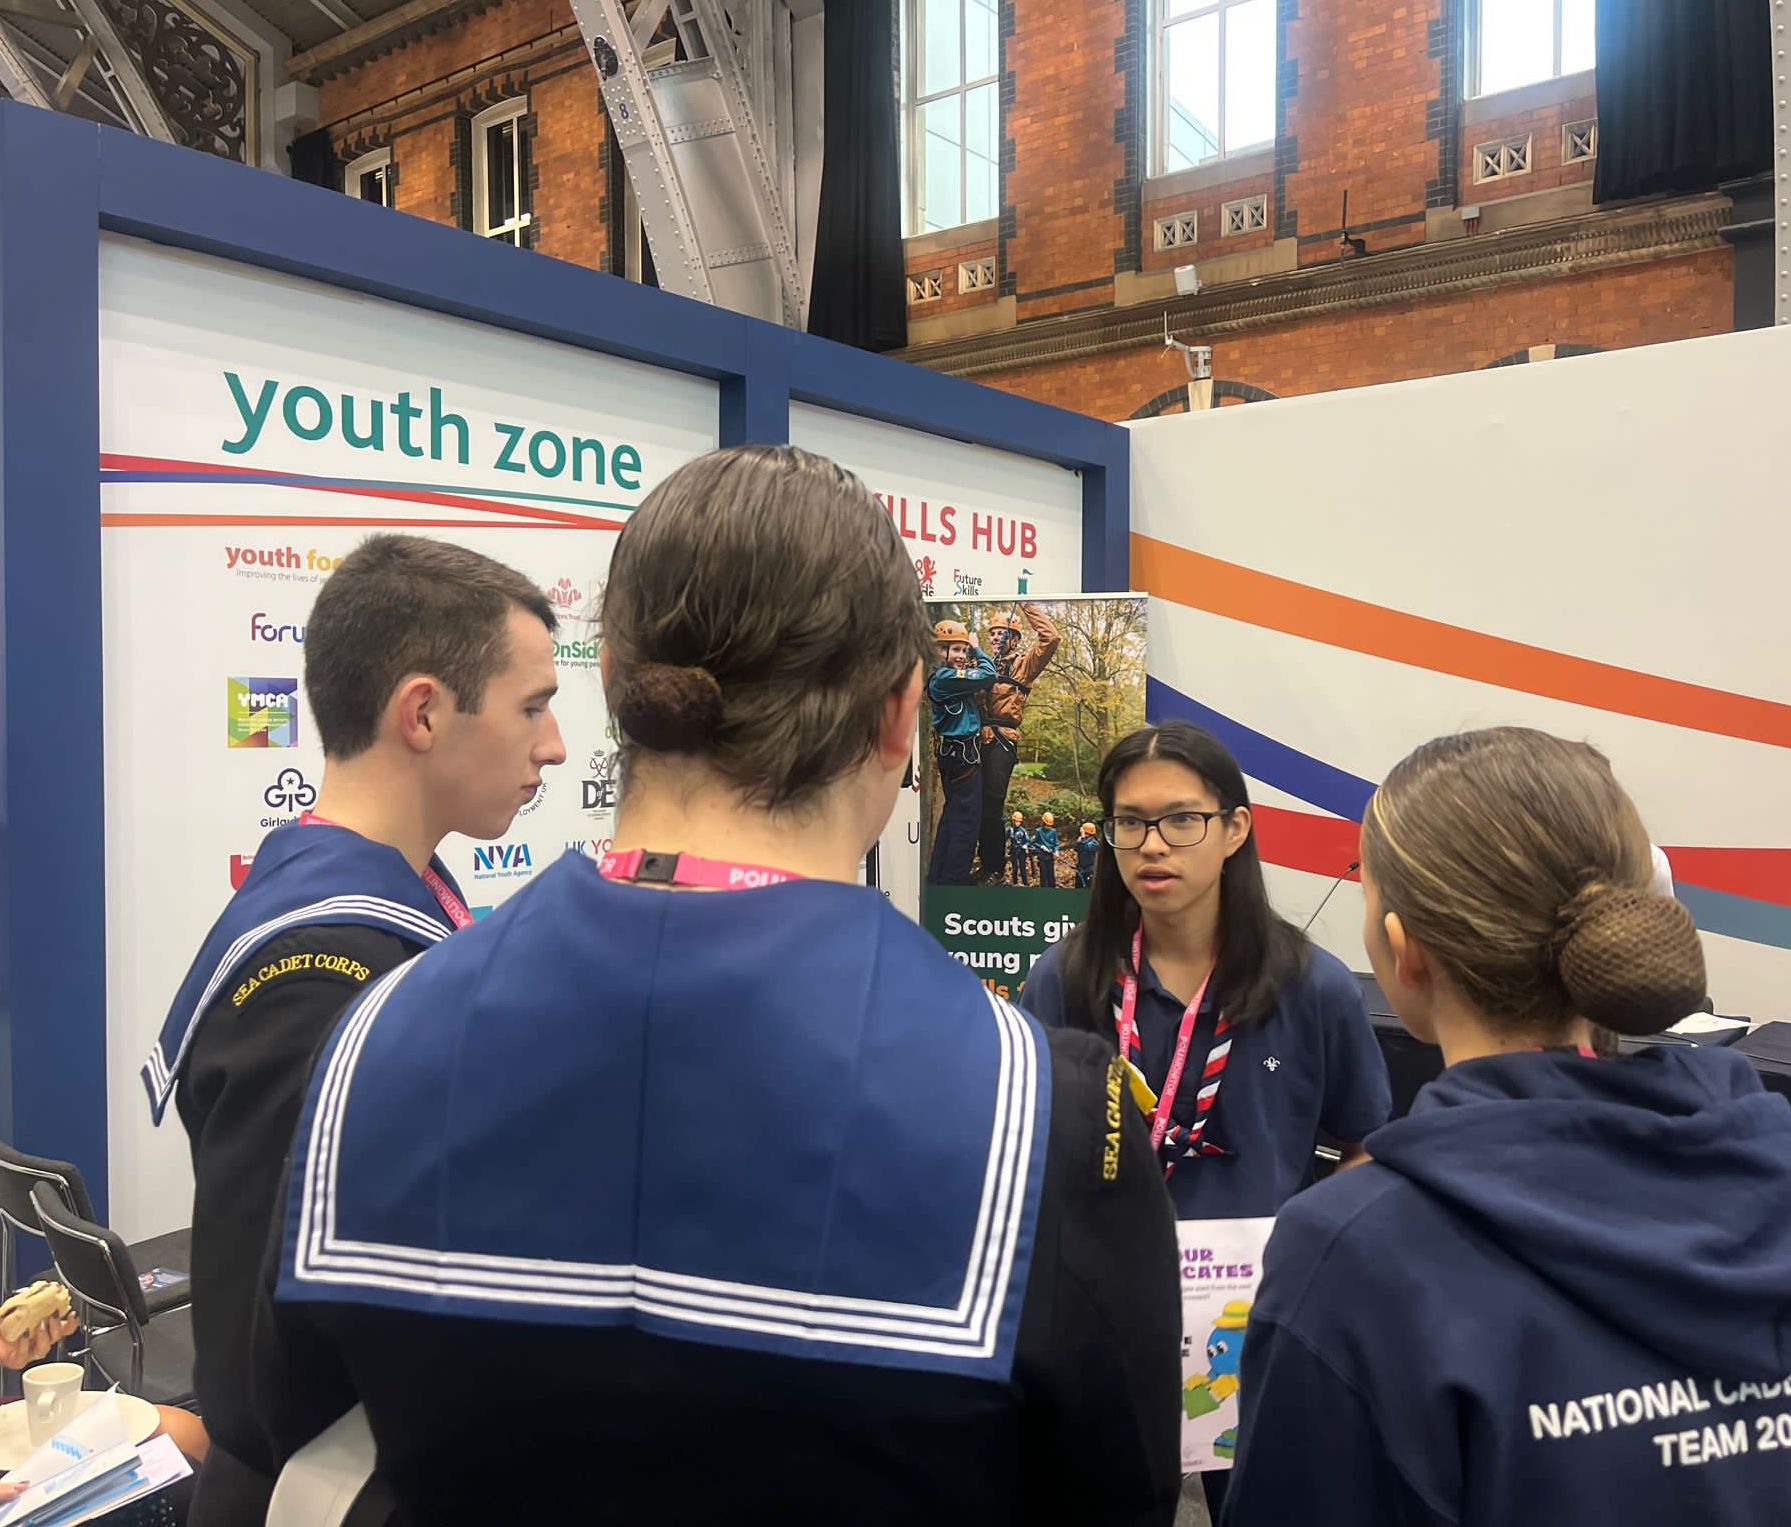 Three Sea Cadets are stood with their backs to the camera wearing navy clothes. They are speaking to Dan, a Scouts Youth Advocate, who is facing the camera and wearing a Scouts necker and navy polo shirt. To the left. is a poster that says 'Youth zone'.